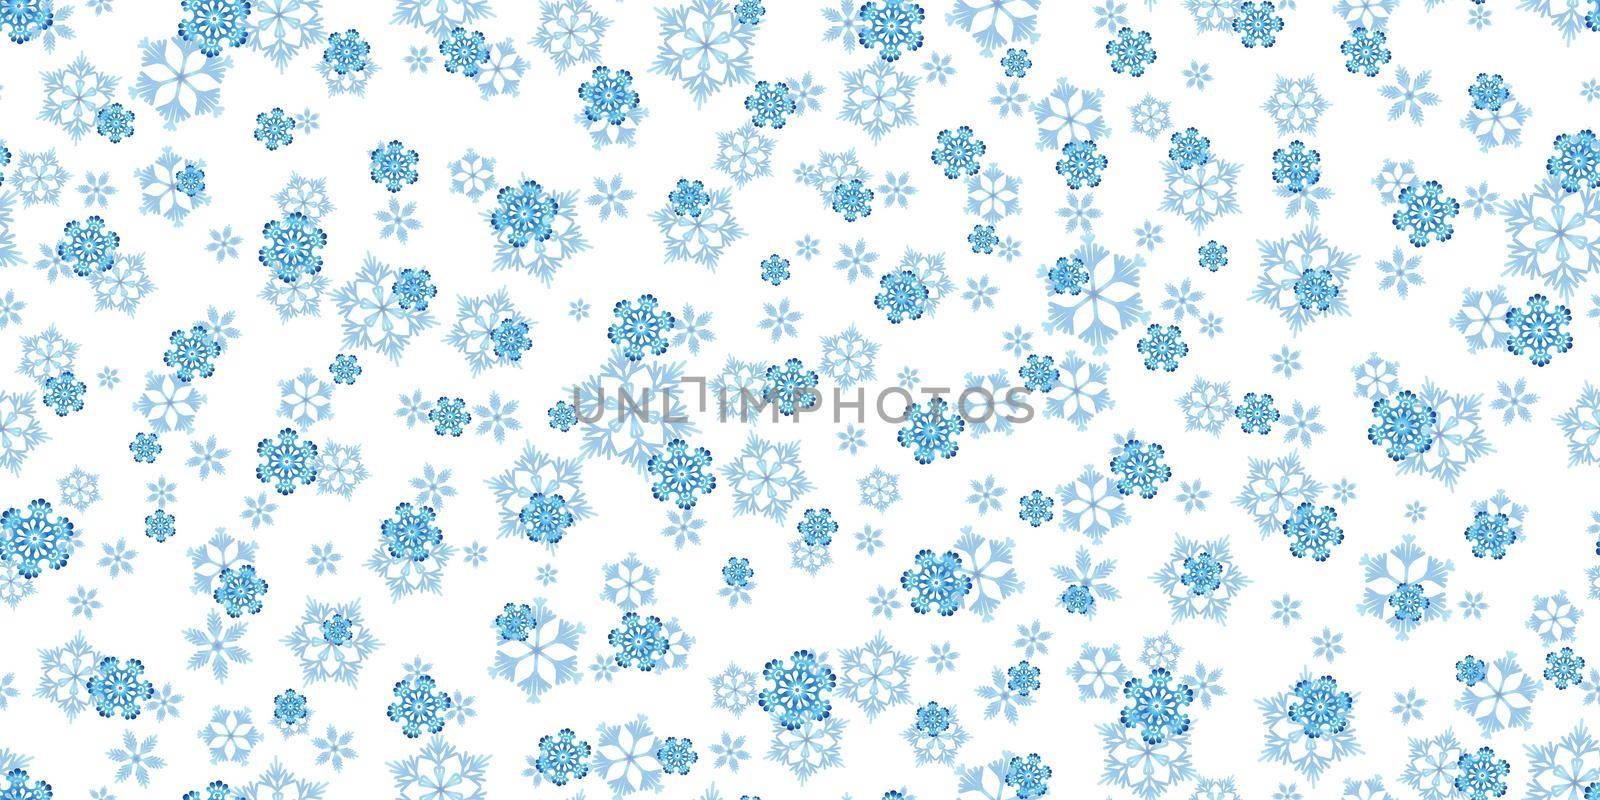 Winter seamless pattern with blue snowflakes on white background. Vector illustration for fabric, textile wallpaper, posters, gift wrapping paper. Christmas vector illustration. Falling snow by allaku